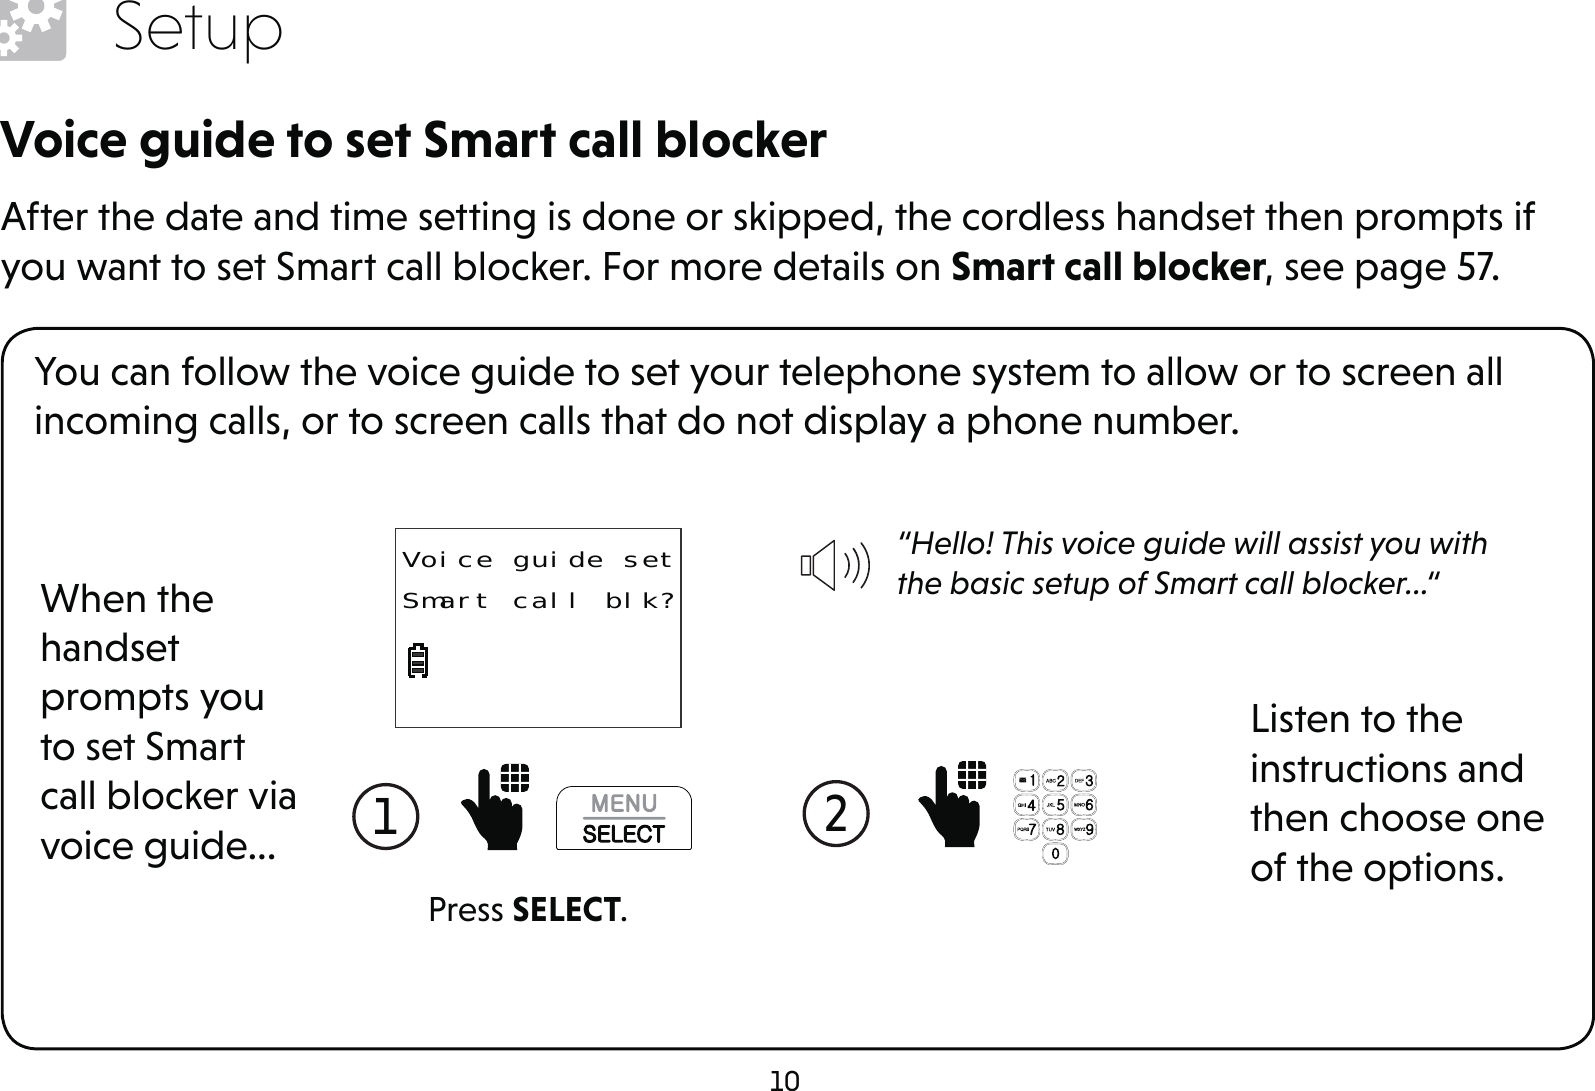 10SetupVoice guide to set Smart call blockerAfter the date and time setting is done or skipped, the cordless handset then prompts if you want to set Smart call blocker. For more details on Smart call blocker, see page 57.You can follow the voice guide to set your telephone system to allow or to screen all incoming calls, or to screen calls that do not display a phone number.When the handset prompts you to set Smart call blocker via voice guide...“Hello! This voice guide will assist you with the basic setup of Smart call blocker...“Listen to the instructions and then choose one of the options.1  2  Press SELECT.Voice guide setSmart call blk?